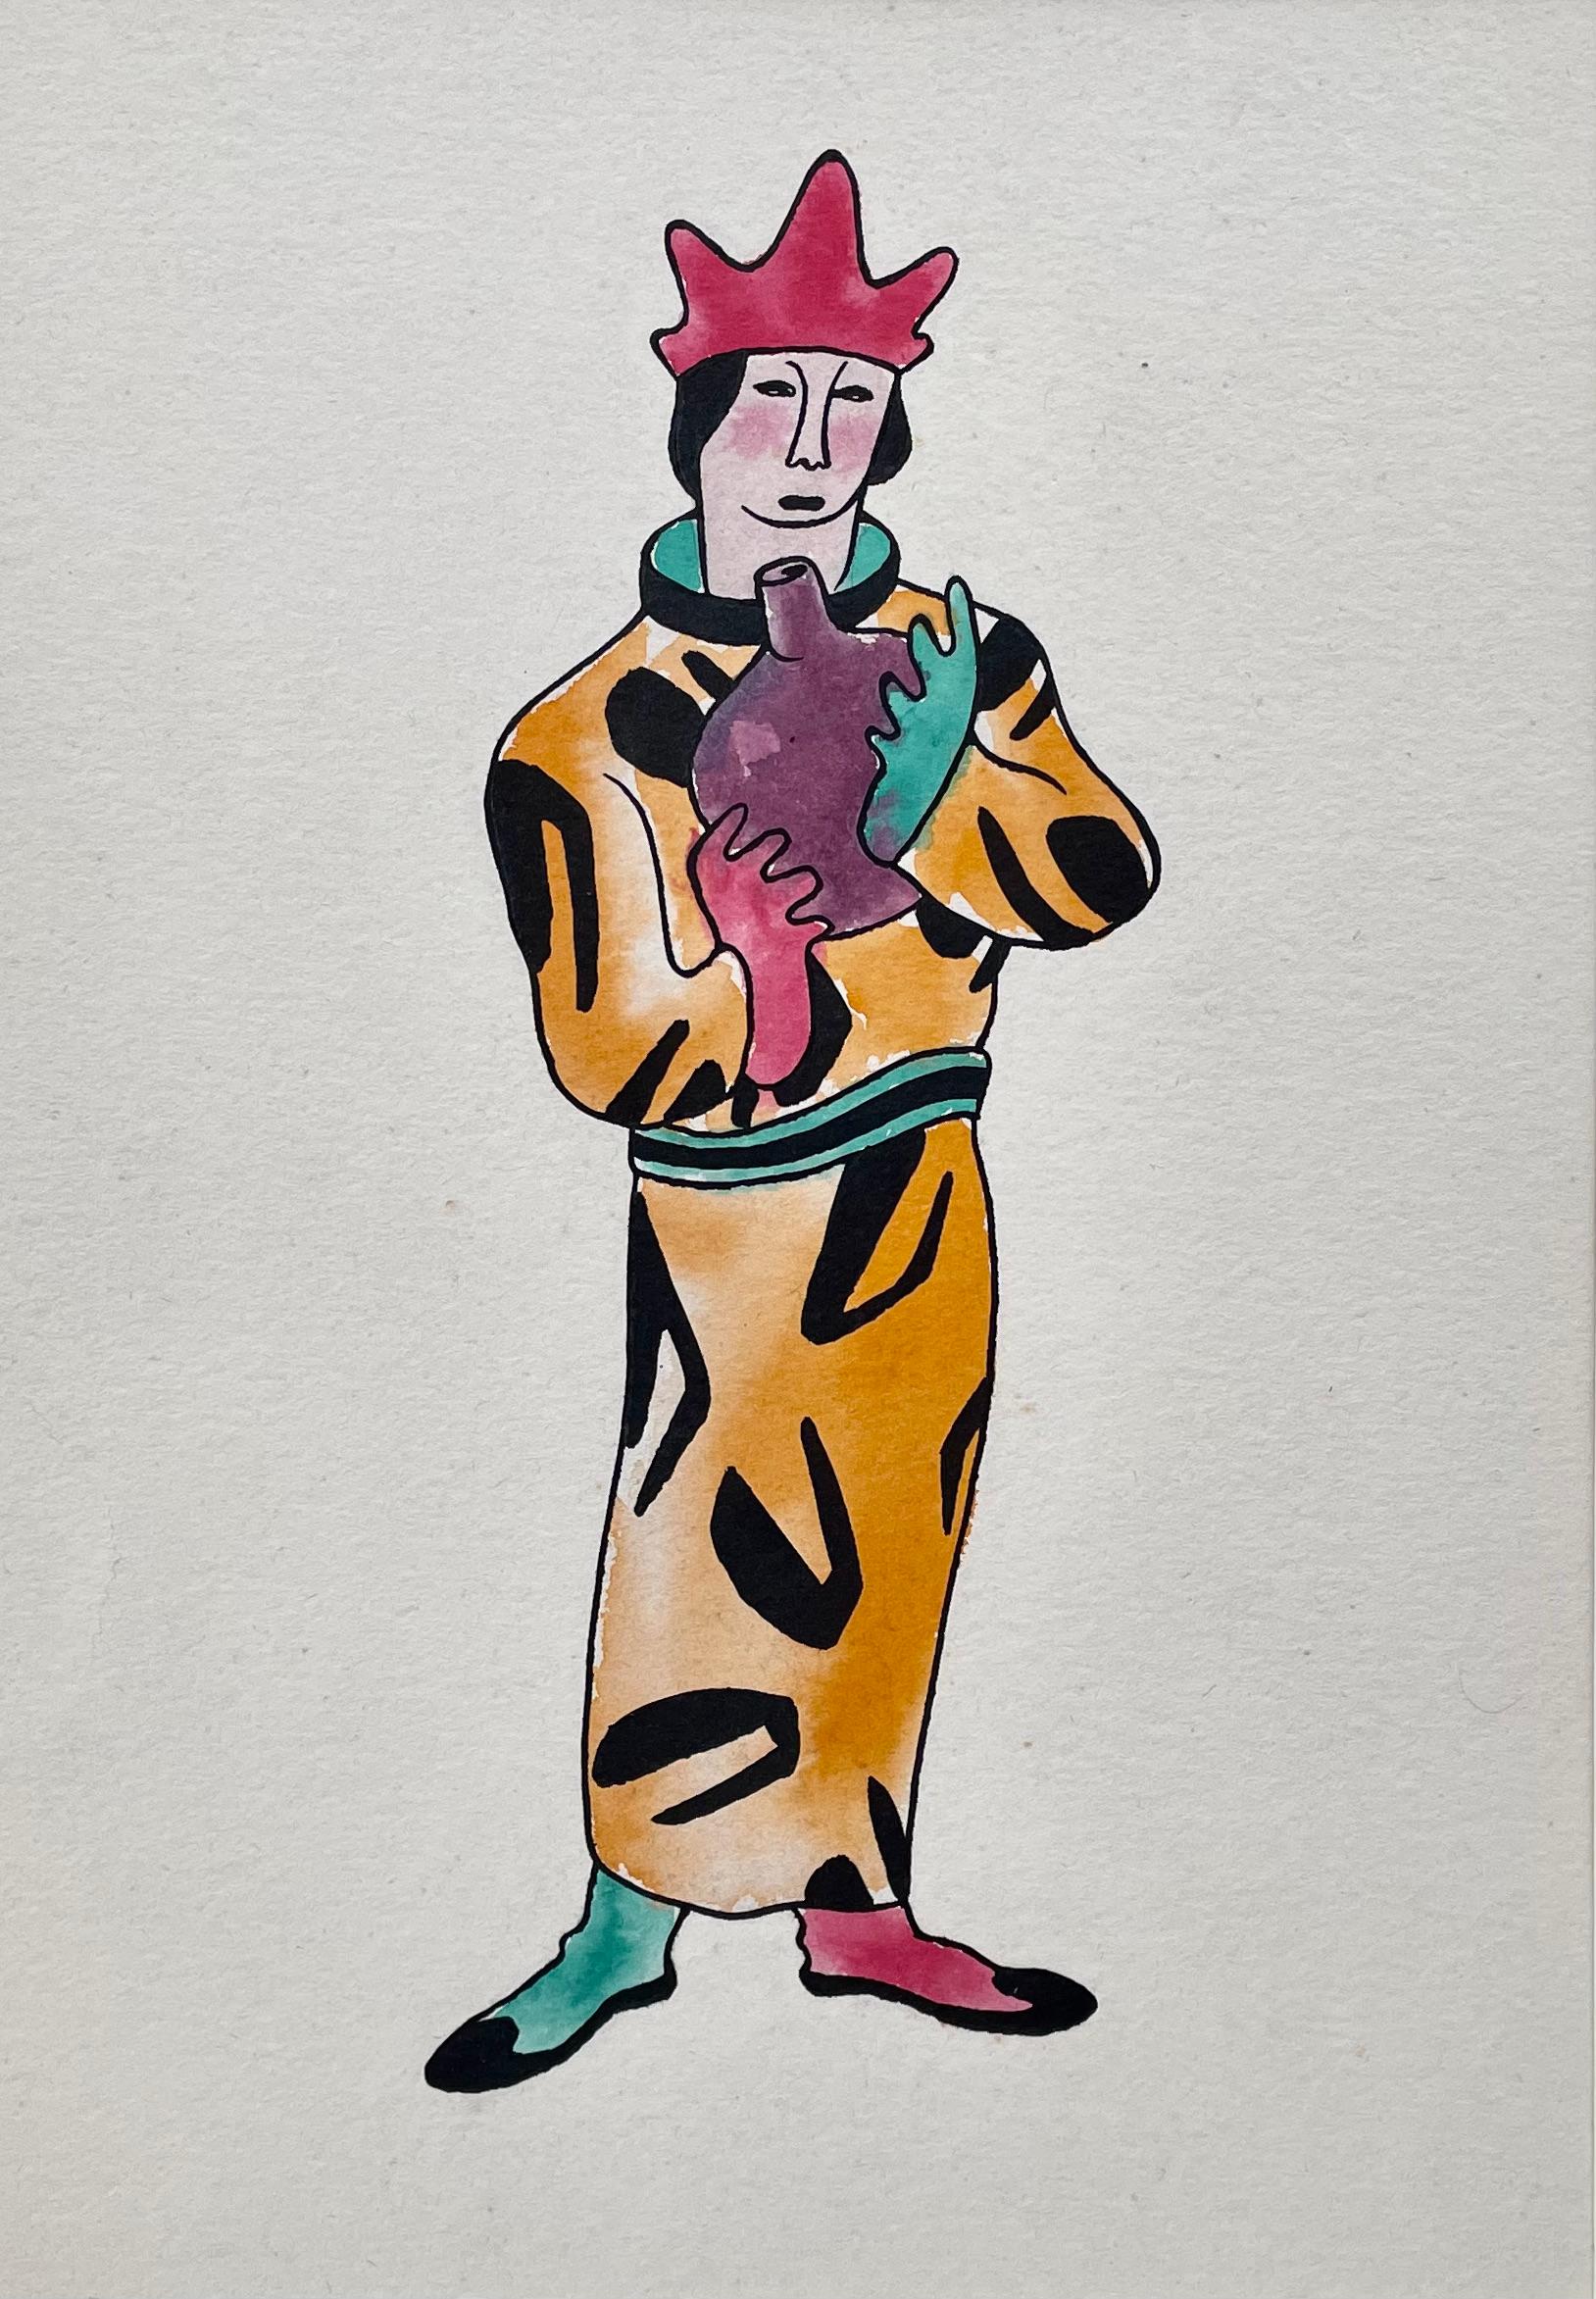 JOHN DRONSFIELD
(1900-1951)

Costume Design

Watercolour and pen and ink
Unframed, in mount only

34 by 24 cm., 13 1/2 by 9 ½ in.
(mount size 47.5 by 37 cm., 18 3/4 by 14 1/2 in.)

John Marsden Dronsfield was born in Lancashire.  He studied briefly